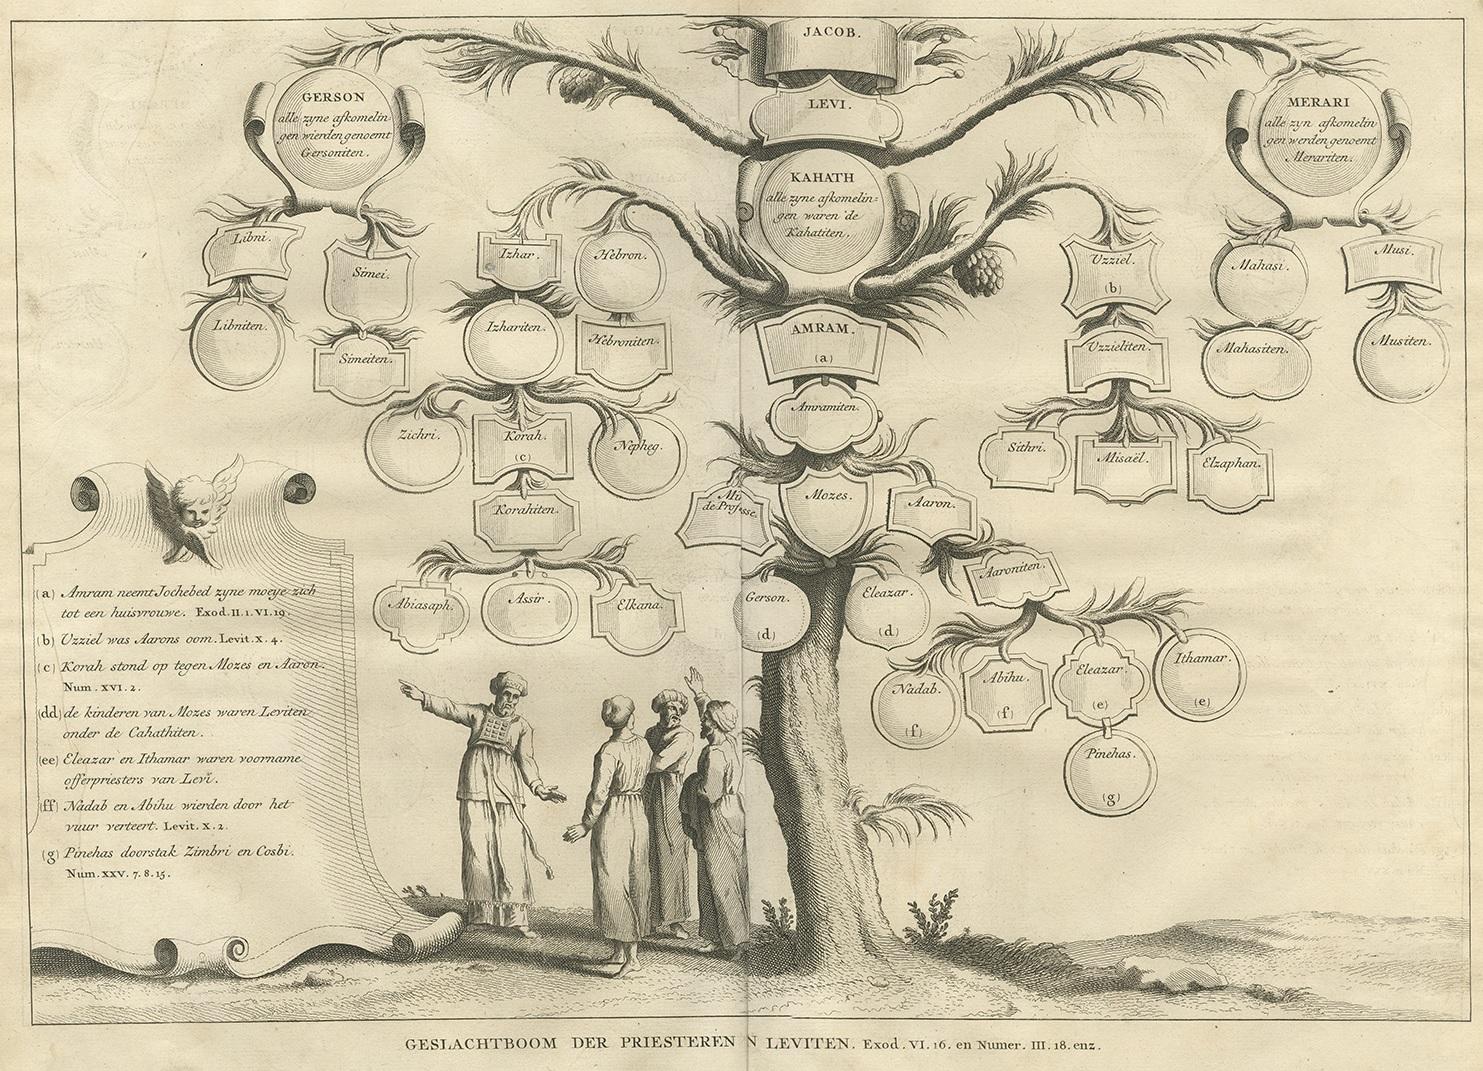 Antique religious print titled 'Geslachtboom der Priesteren en Leviten'. This antique print depicts the family tree of the Priests and Levites, as described in Exodus 6:16 and 3:18. This antique print originates from 'Het algemeen groot historisch,